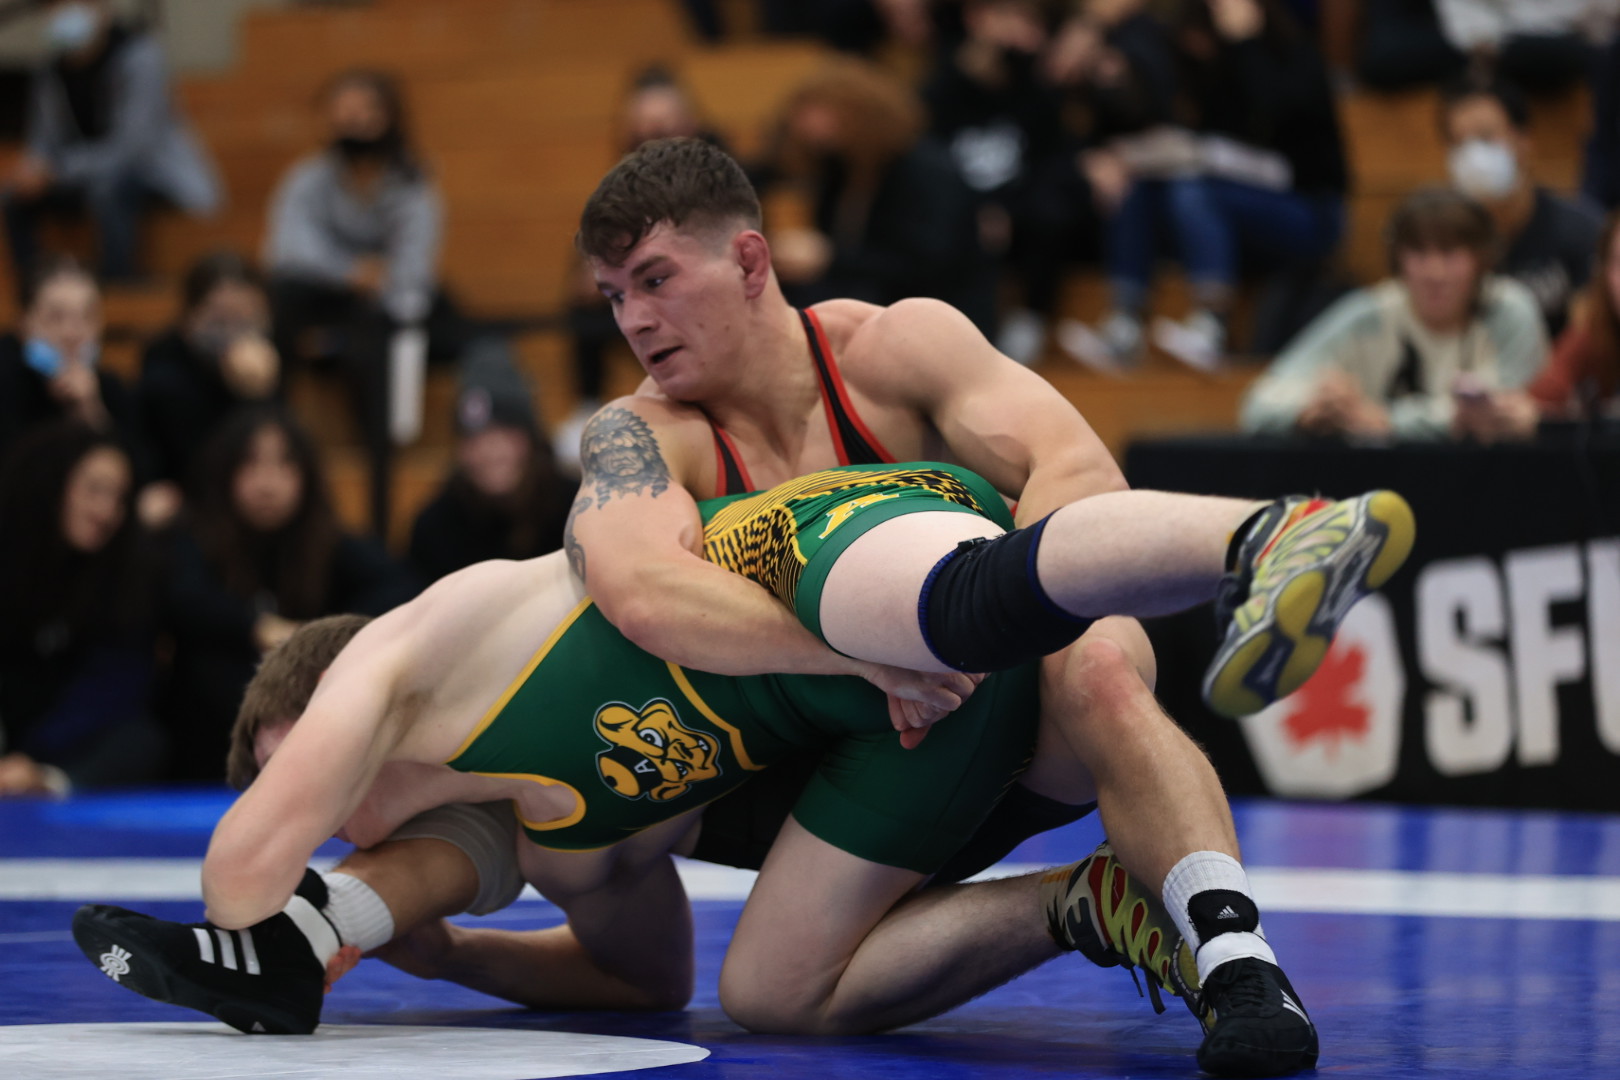 Logan Nelson grapples an opponent on the floor, with his arms locked around their leg.